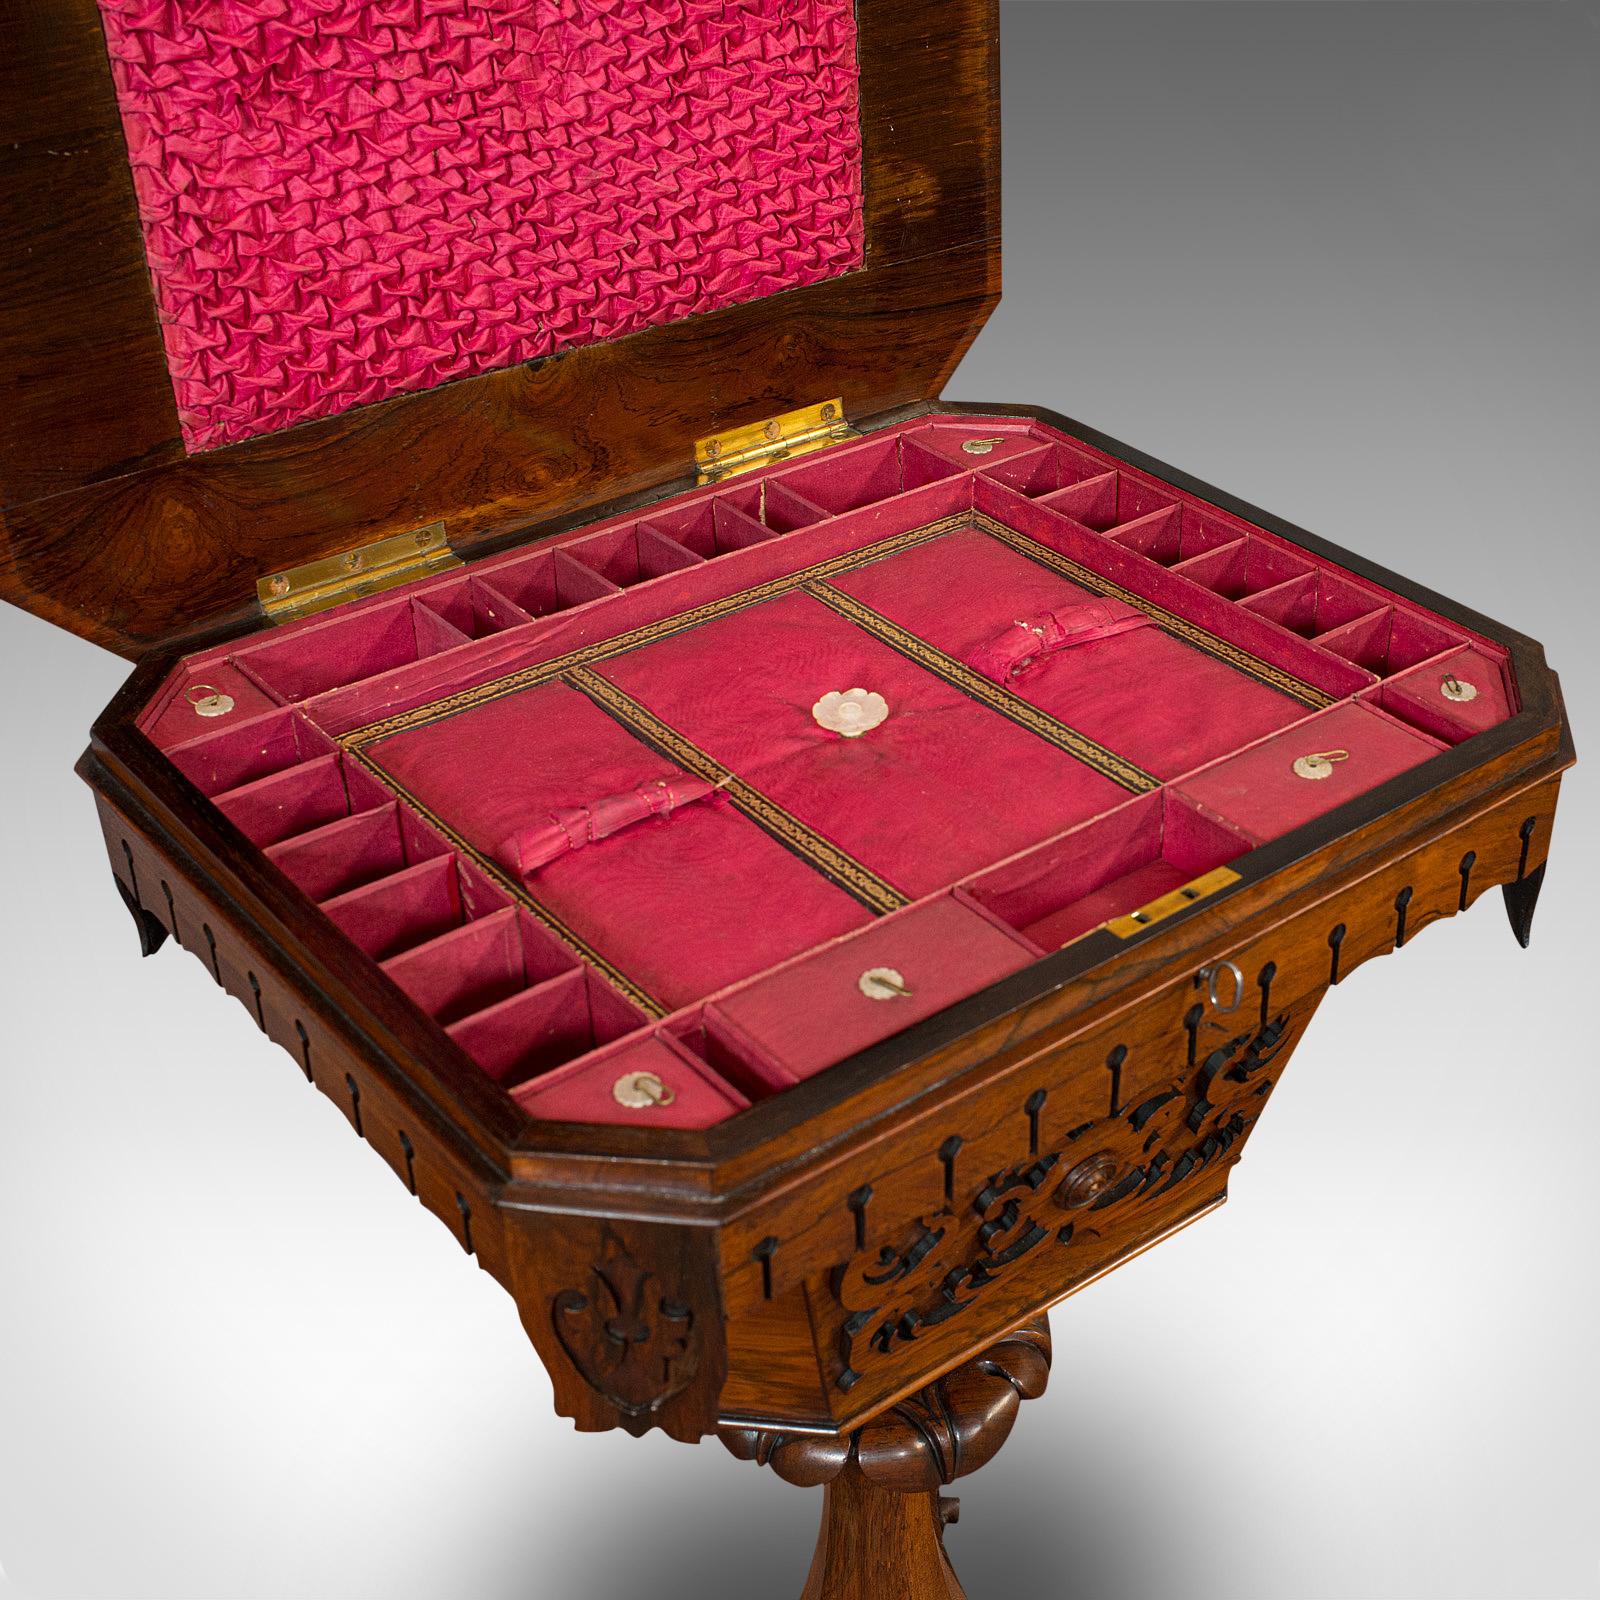 Antique Lady's Work Box, English, Rosewood, Sewing, Table, Regency, circa 1820 5